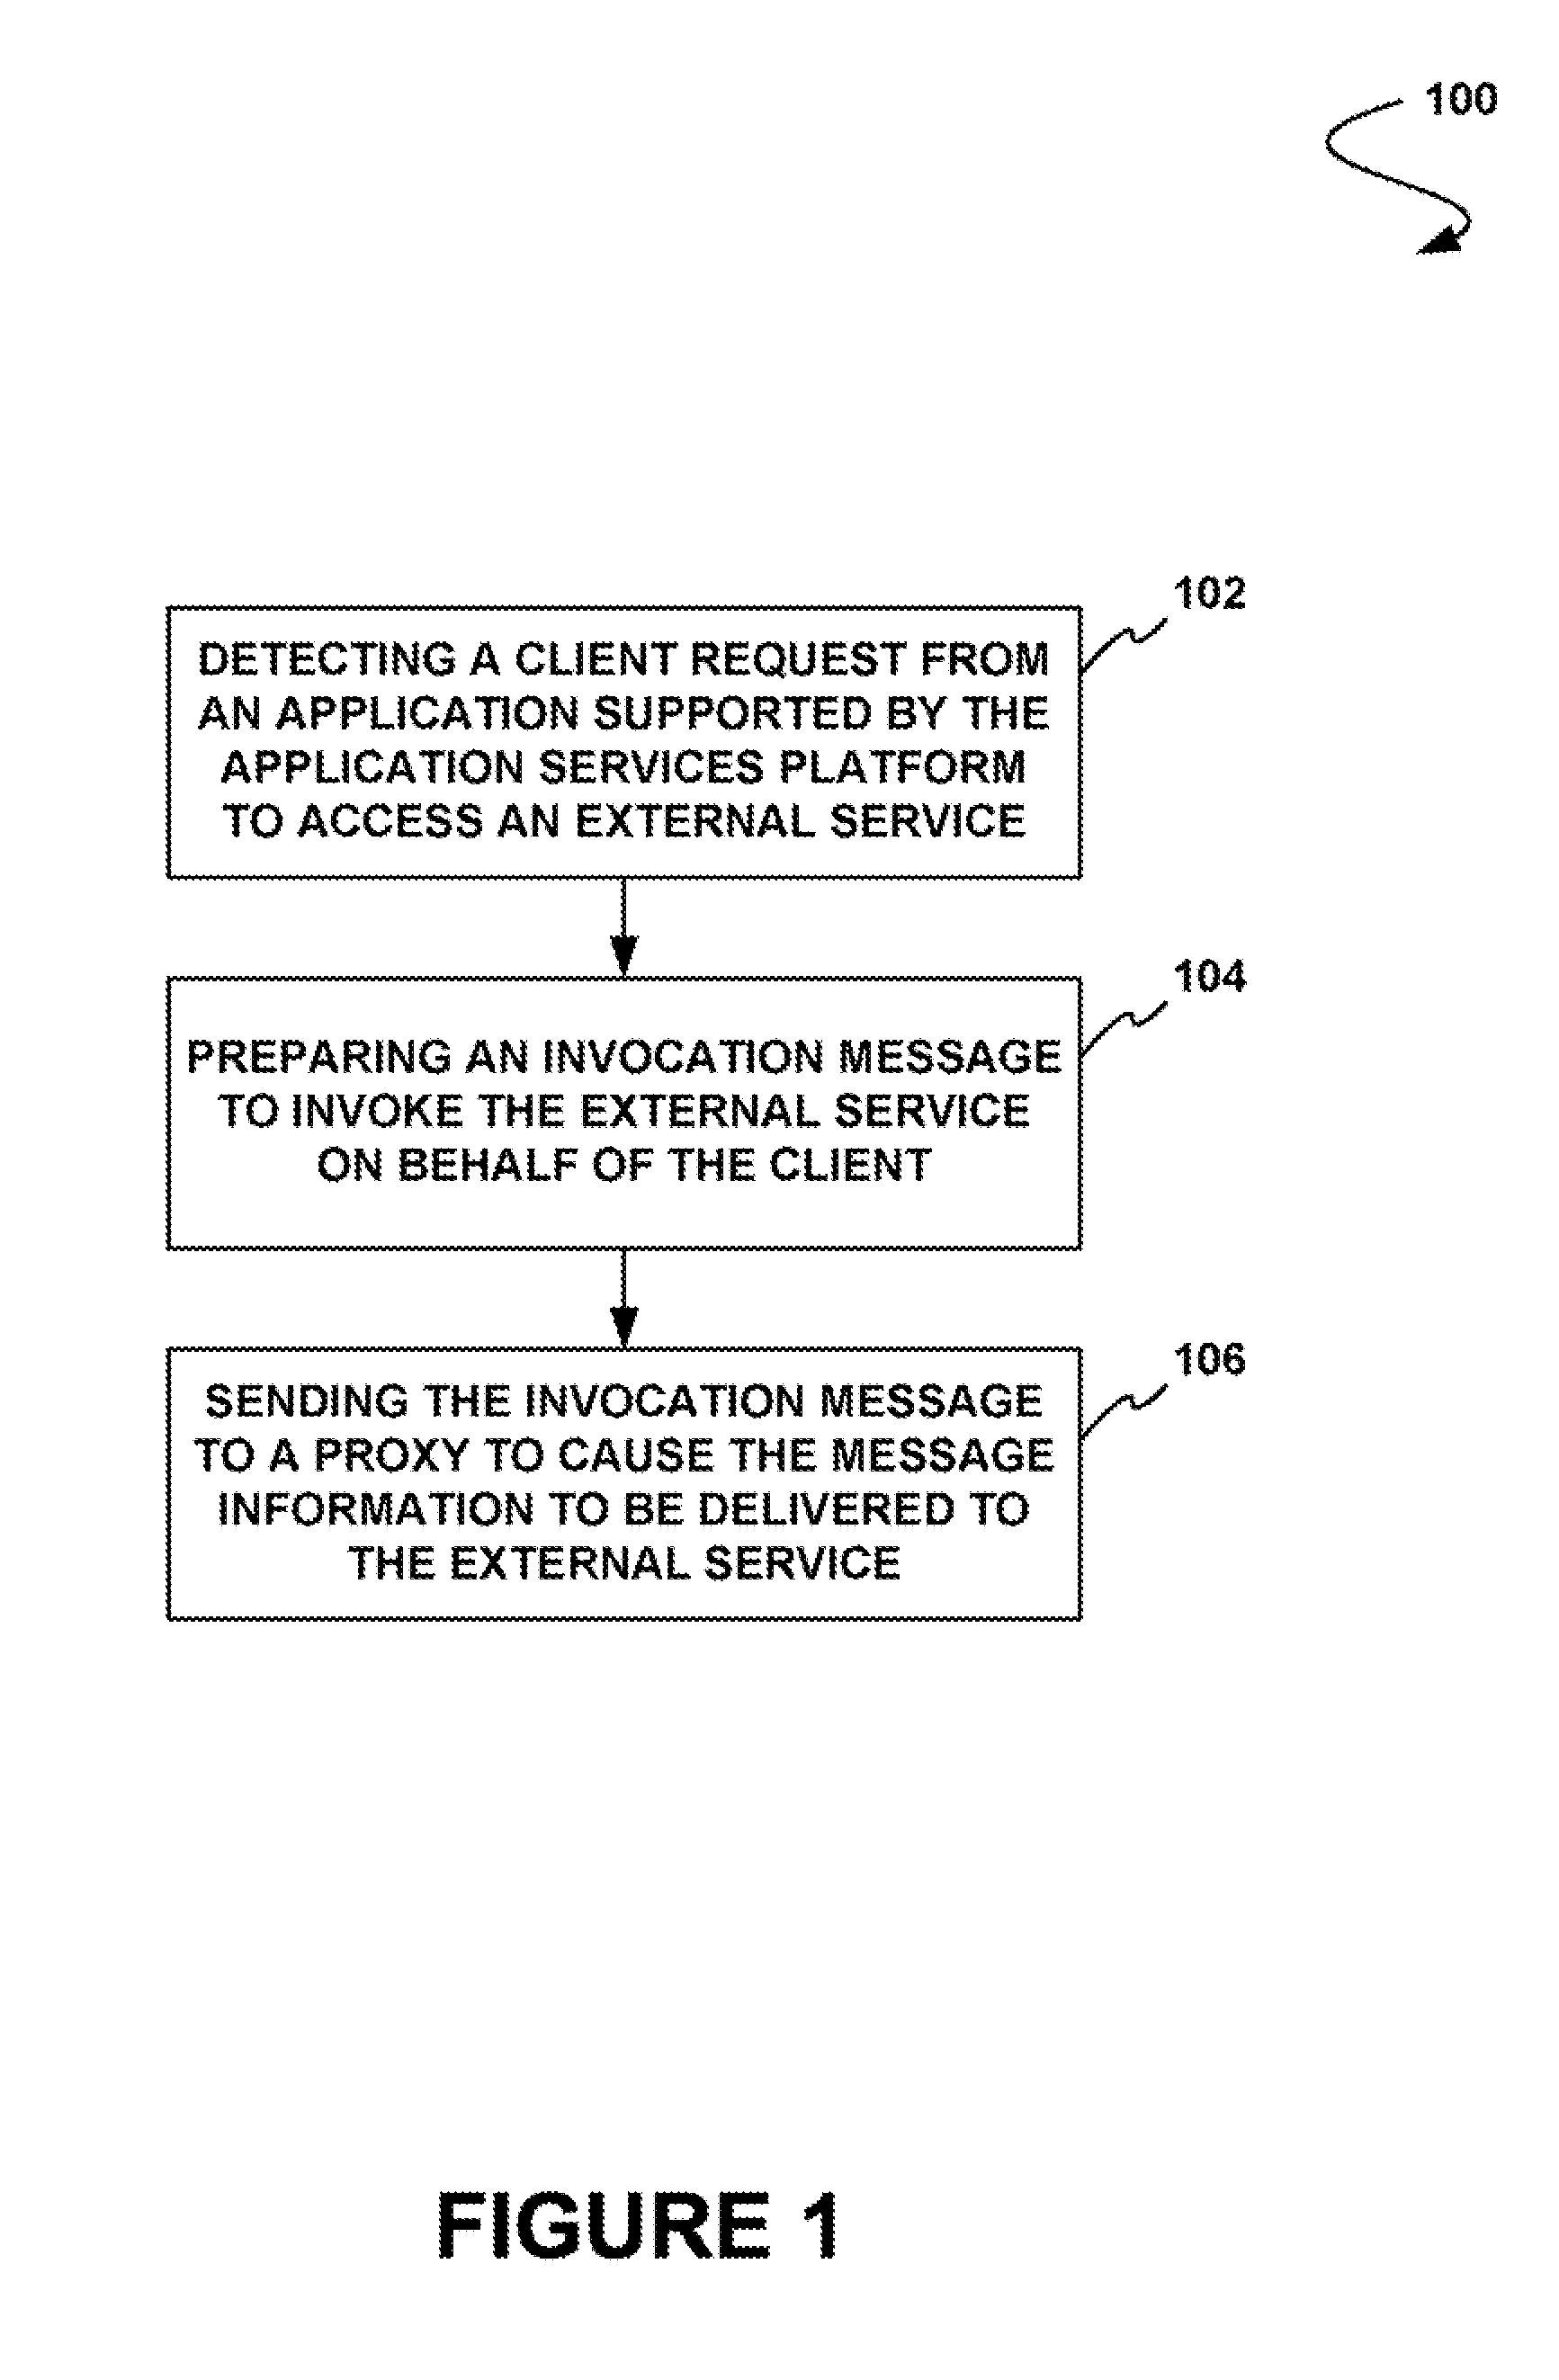 Method and system for providing a client access to an external service via an application services platform